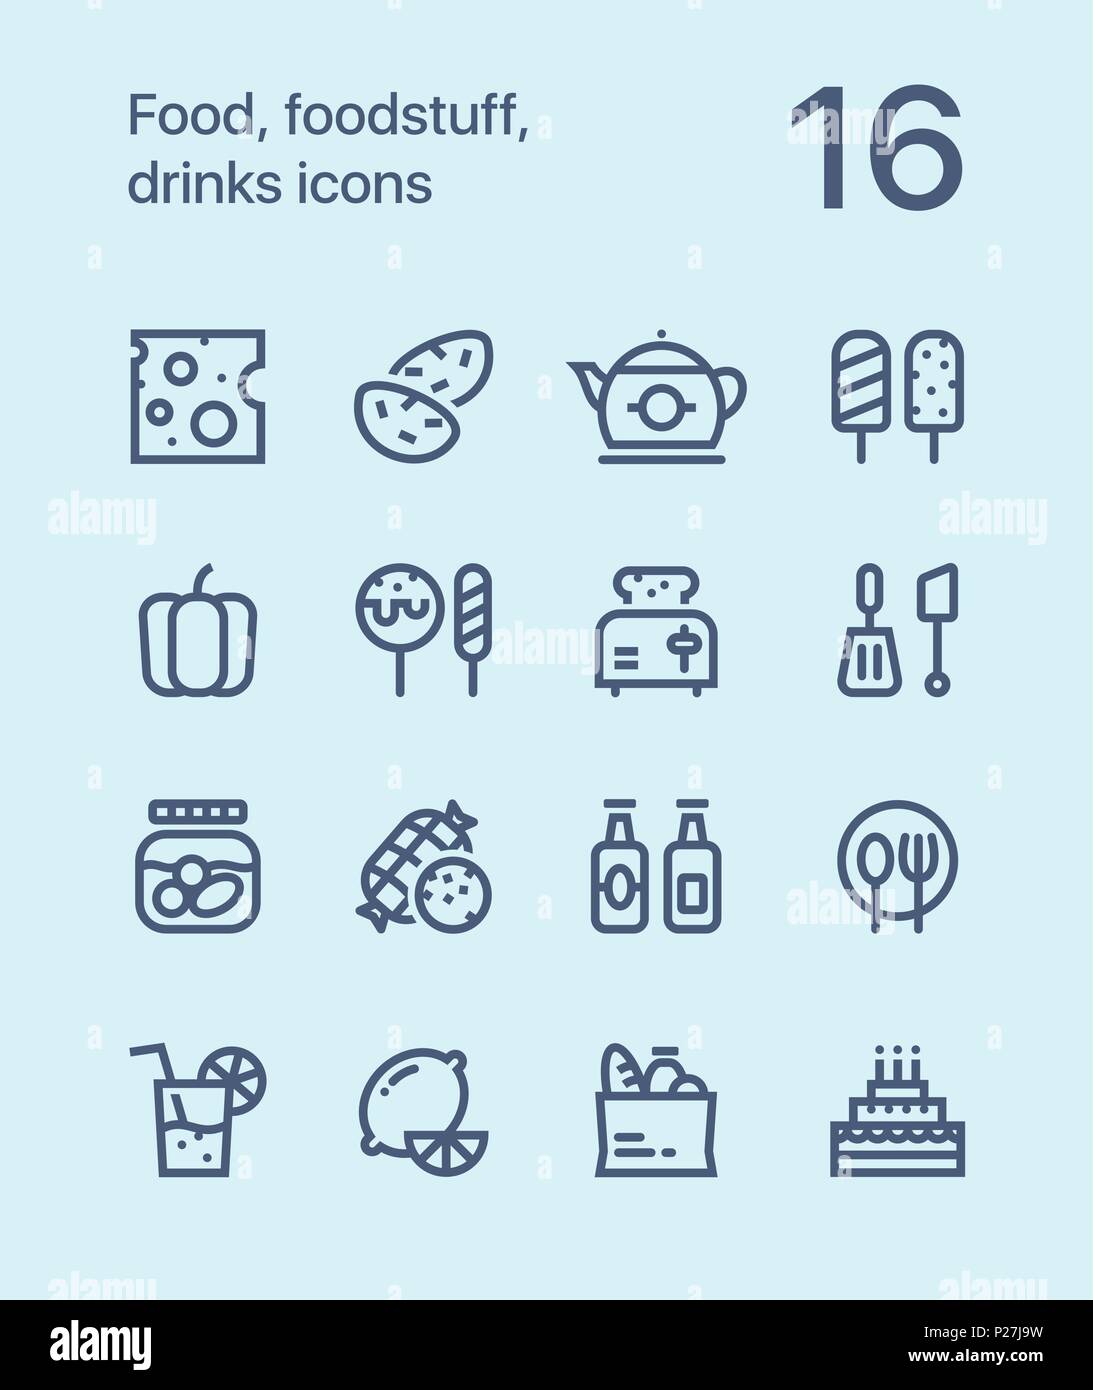 Outline Food, foodstuff, drinks icons for web and mobile design pack 2 Stock Vector